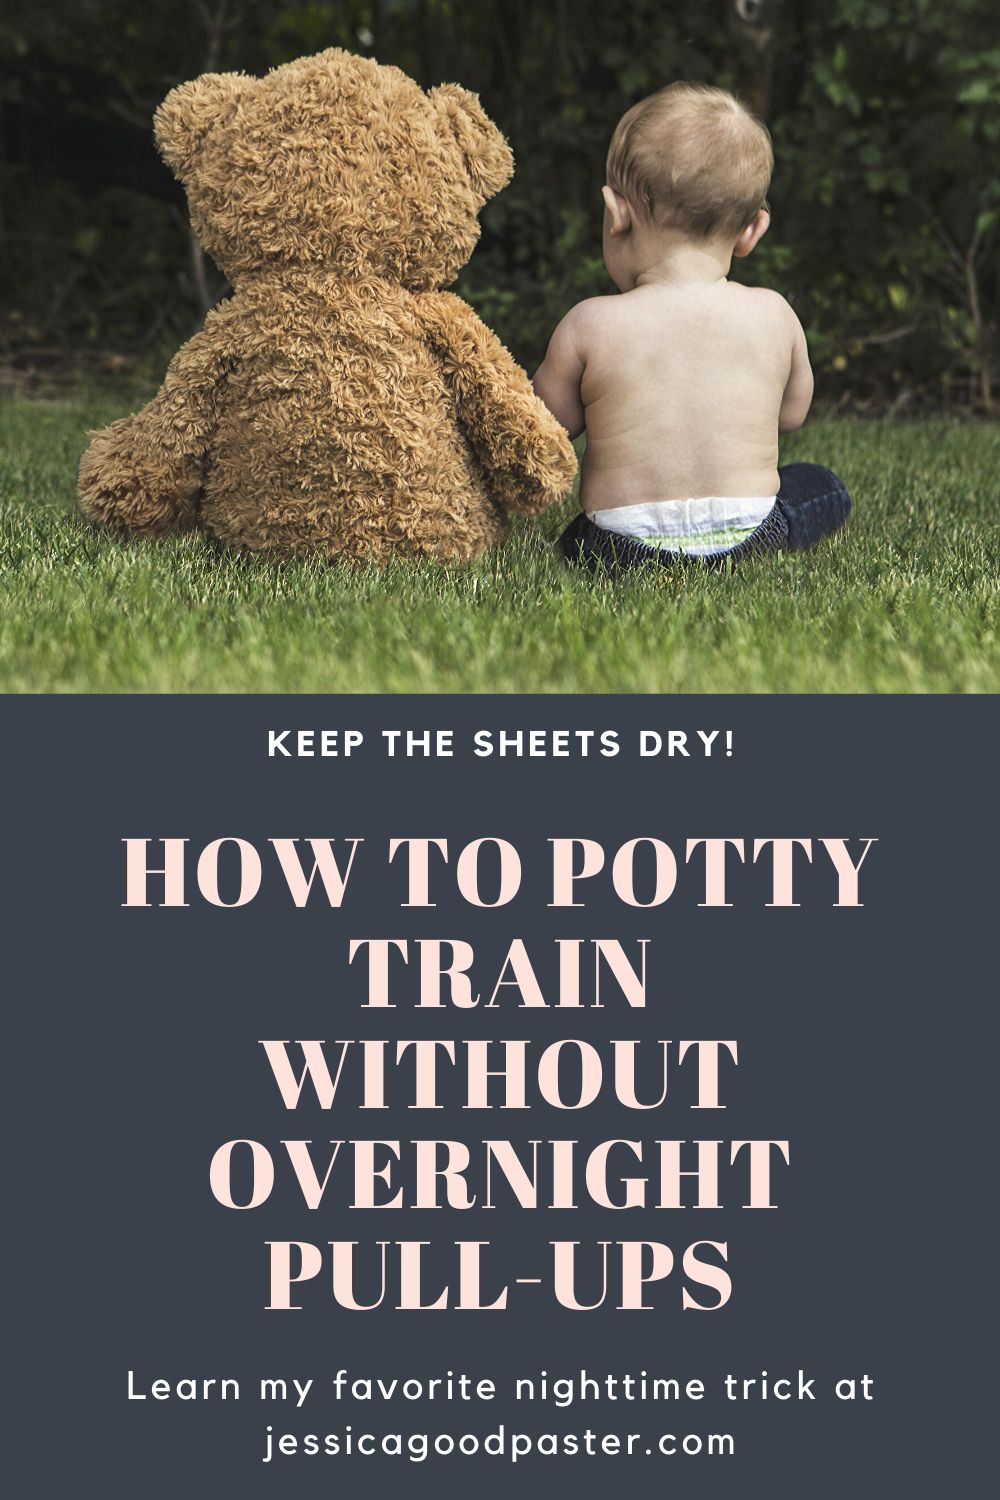 The Secret to Potty Training at Night - A Peejamas Review | This tip will help kid get over the hump of potty training at night. These essentials are great for boys and girls. Avoid expensive disposable overnight pull-ups with this pajama hack. Especially helpful in this time of coronavirus Pull-Ups shortages. #pottytraining  #pottytrainingtips #bedwetting #kidspajamas #coronavirus